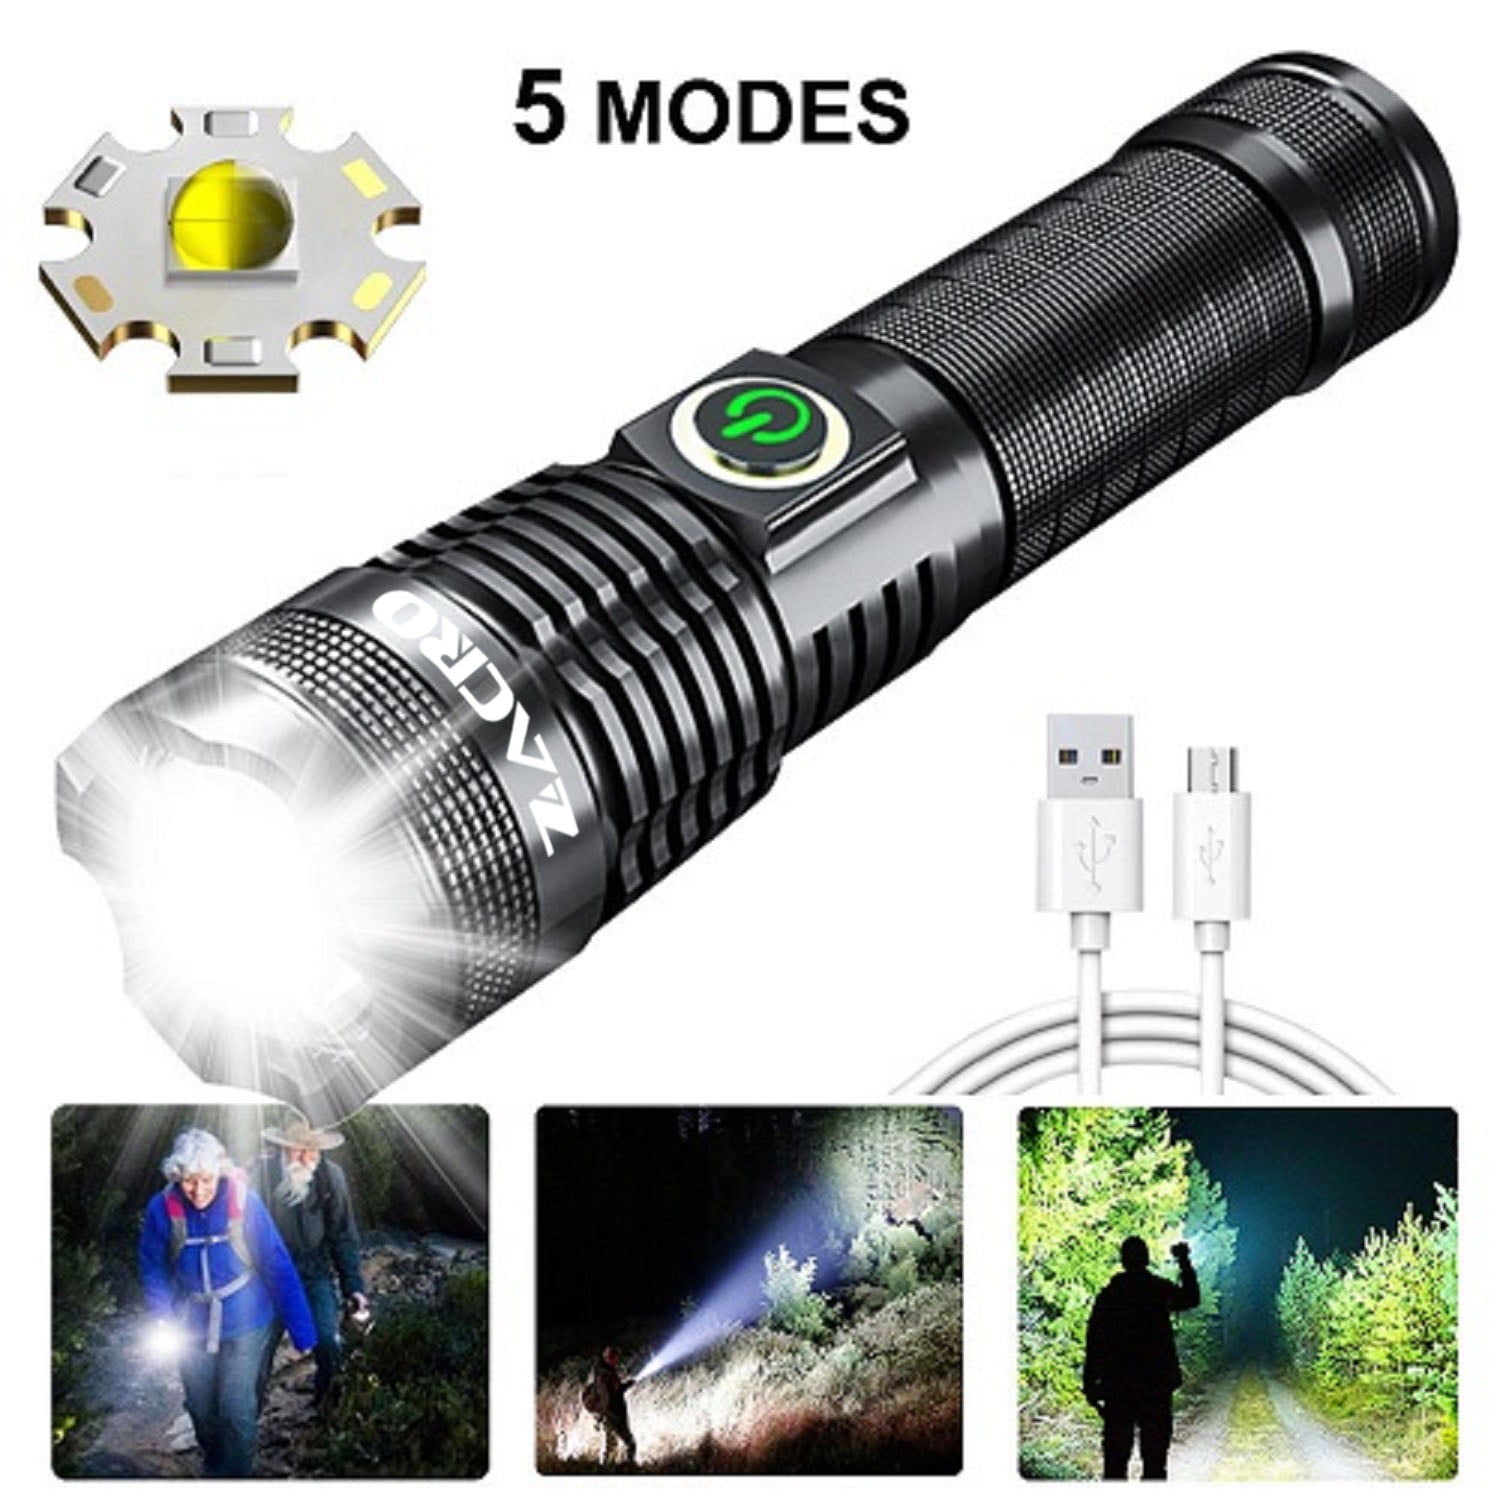 100000 Lumens Rechargeable Flashlight, Waterproof Searchlight Super Bright Powerful LED Flashlight with Modes Zoom Torch for Emergency Hiking Hunting Outdoor Sport (Battery - Walmart.com